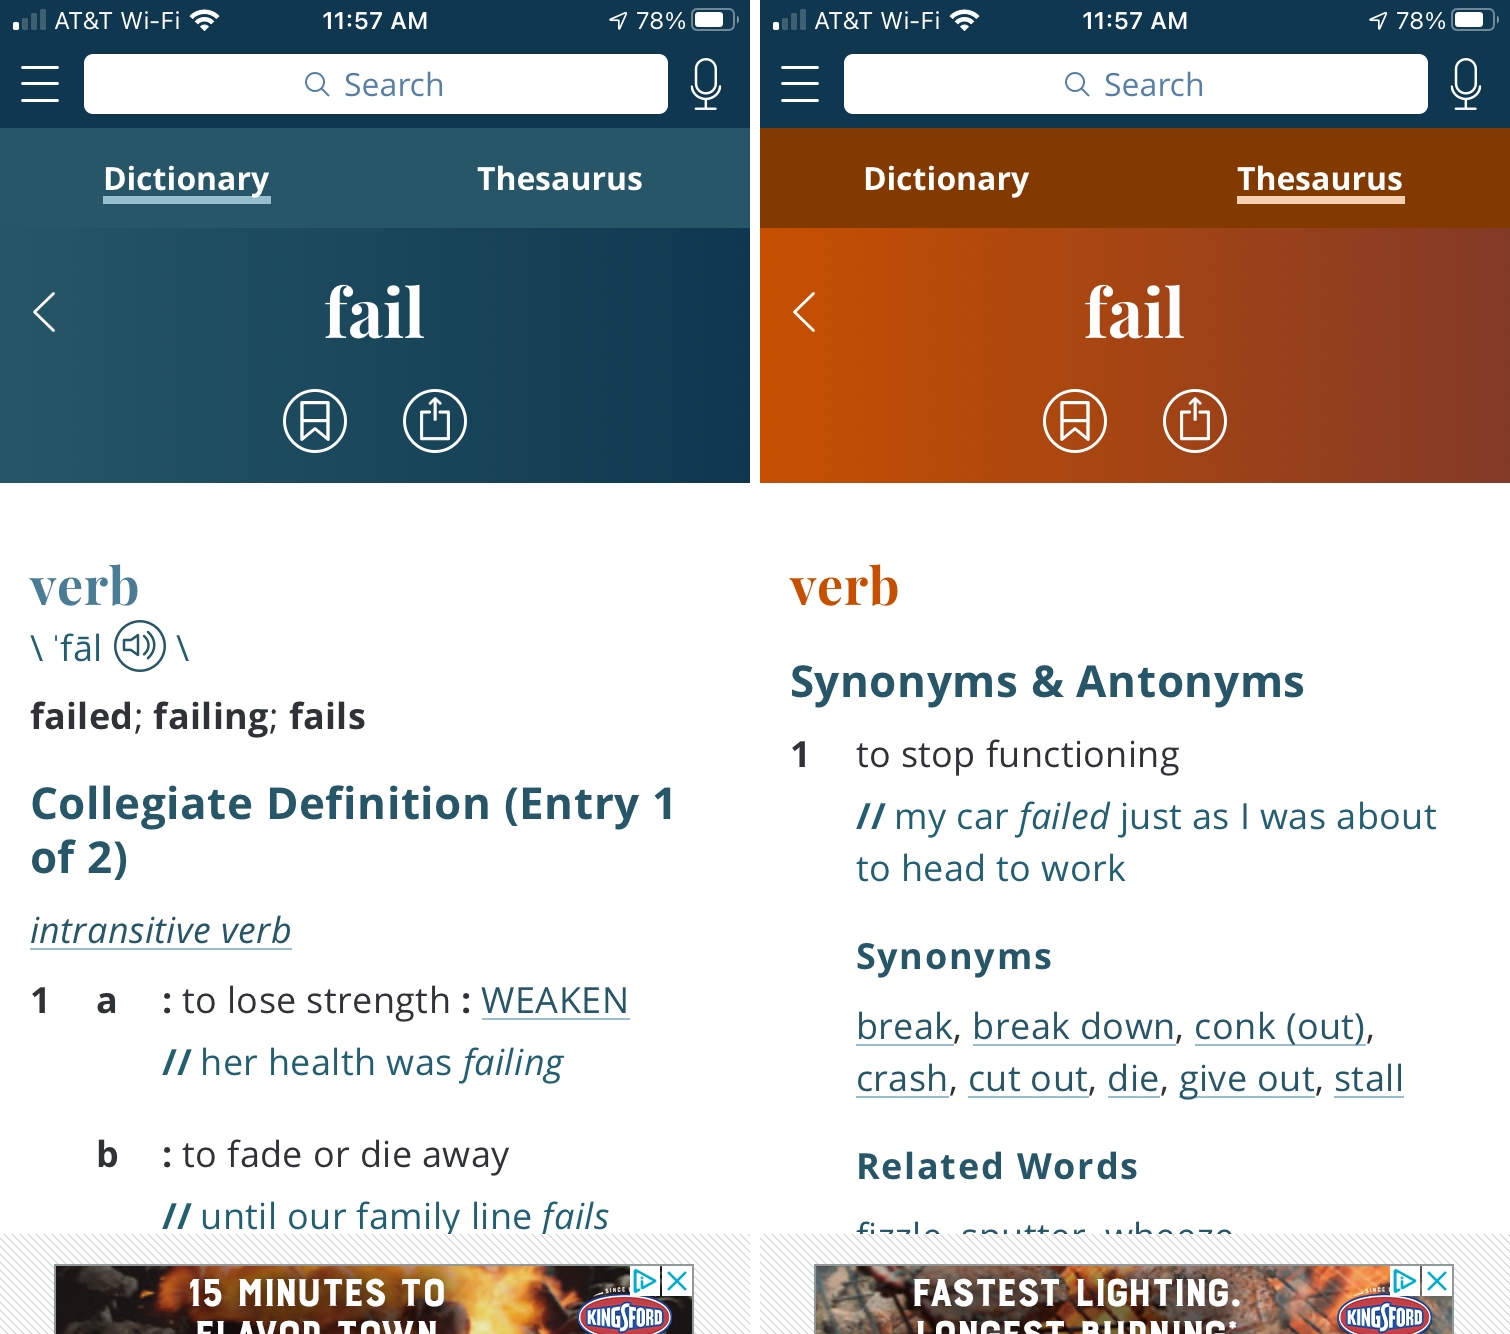 Merriam Webster Dictionary and Thesaurus on iPhone